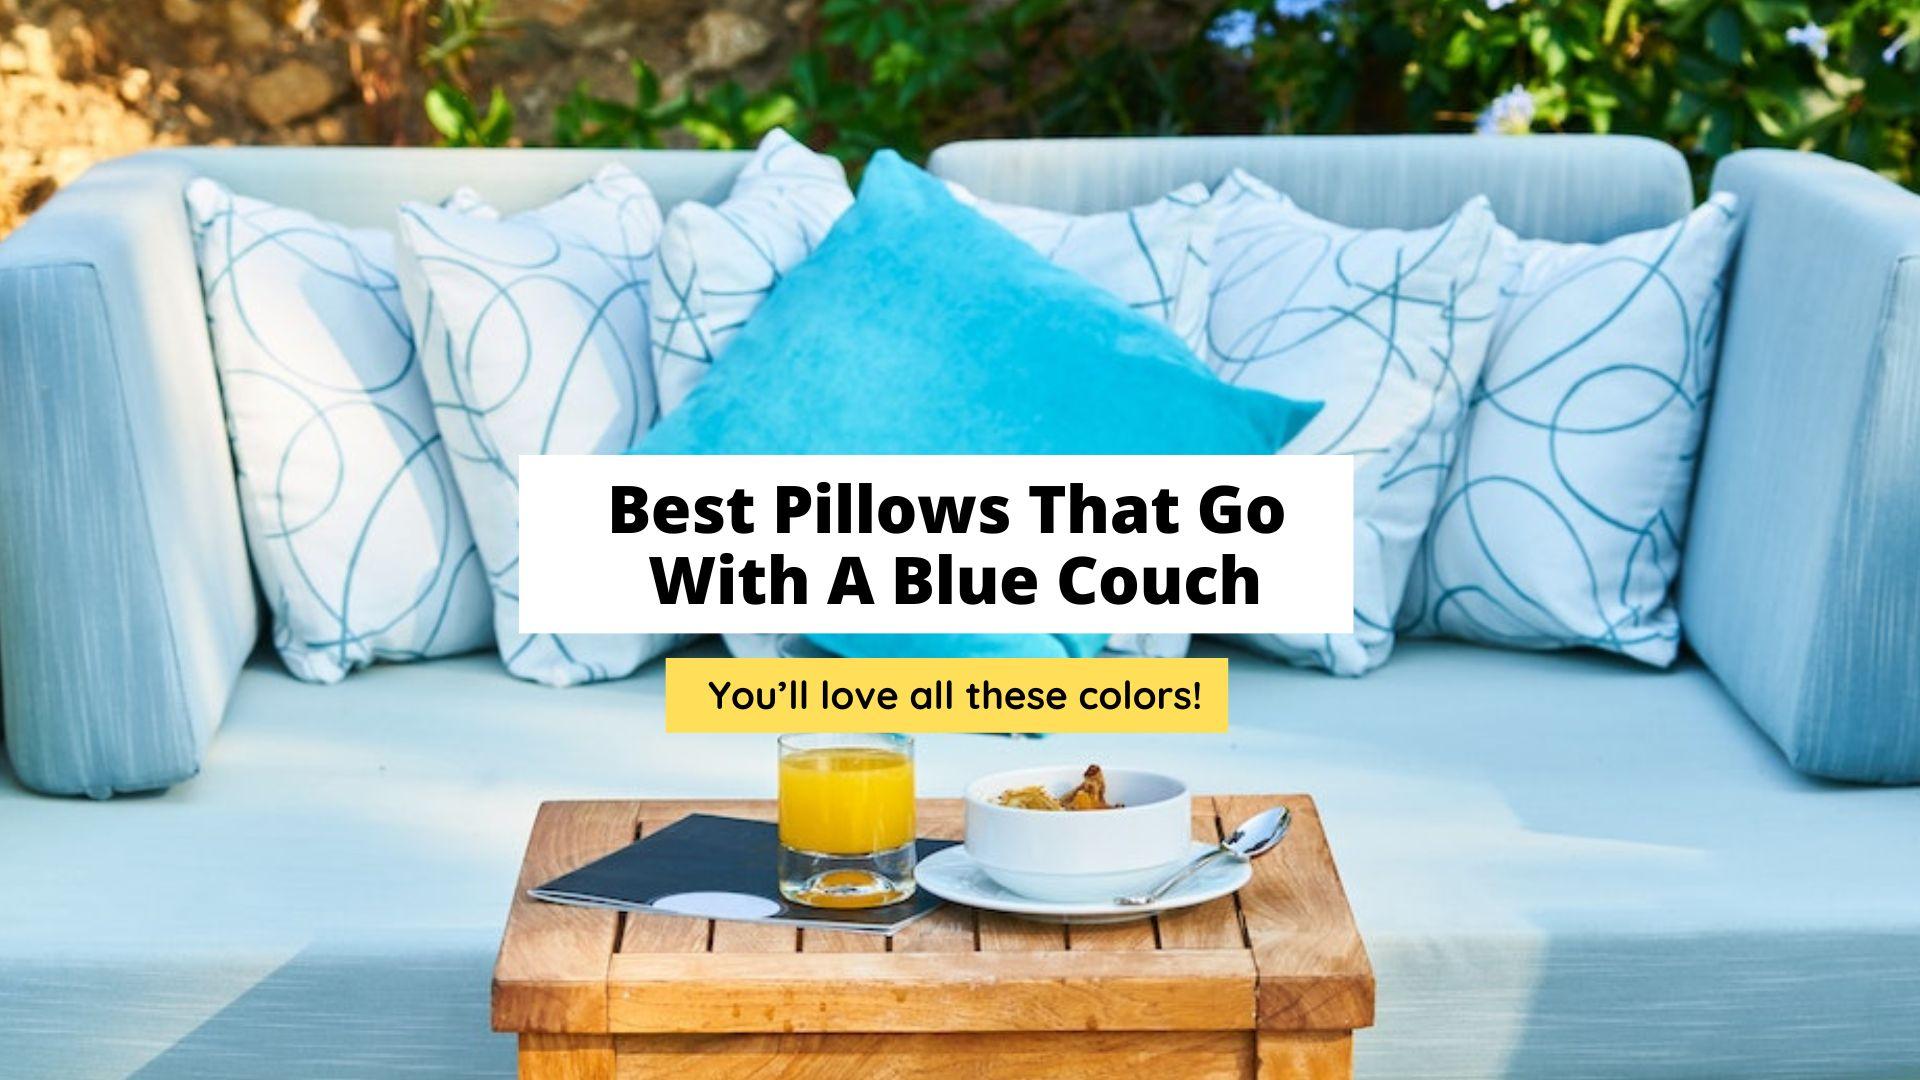 Best Pillows That Go With A Blue Couch